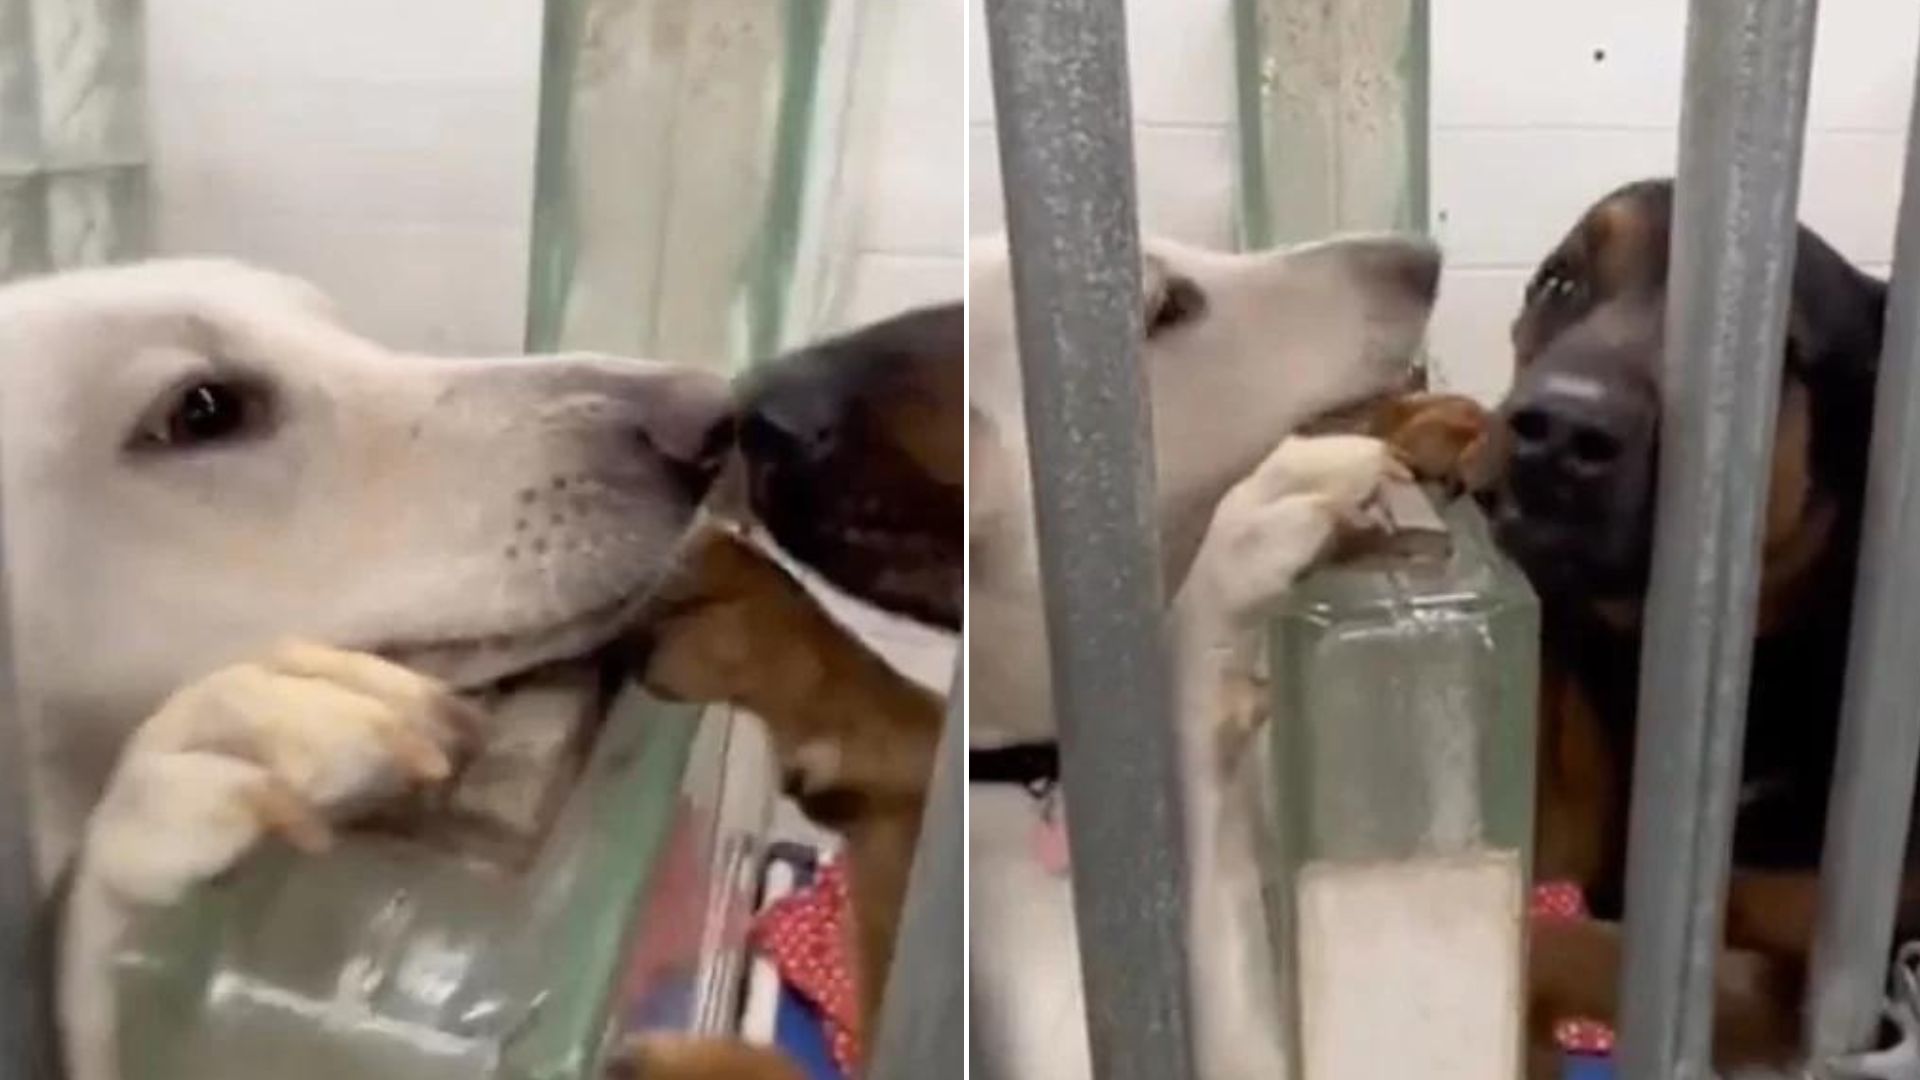 Shelter Dogs Cheer Up Each Other By Touching Noses To Brighten Their Days At The Shelter